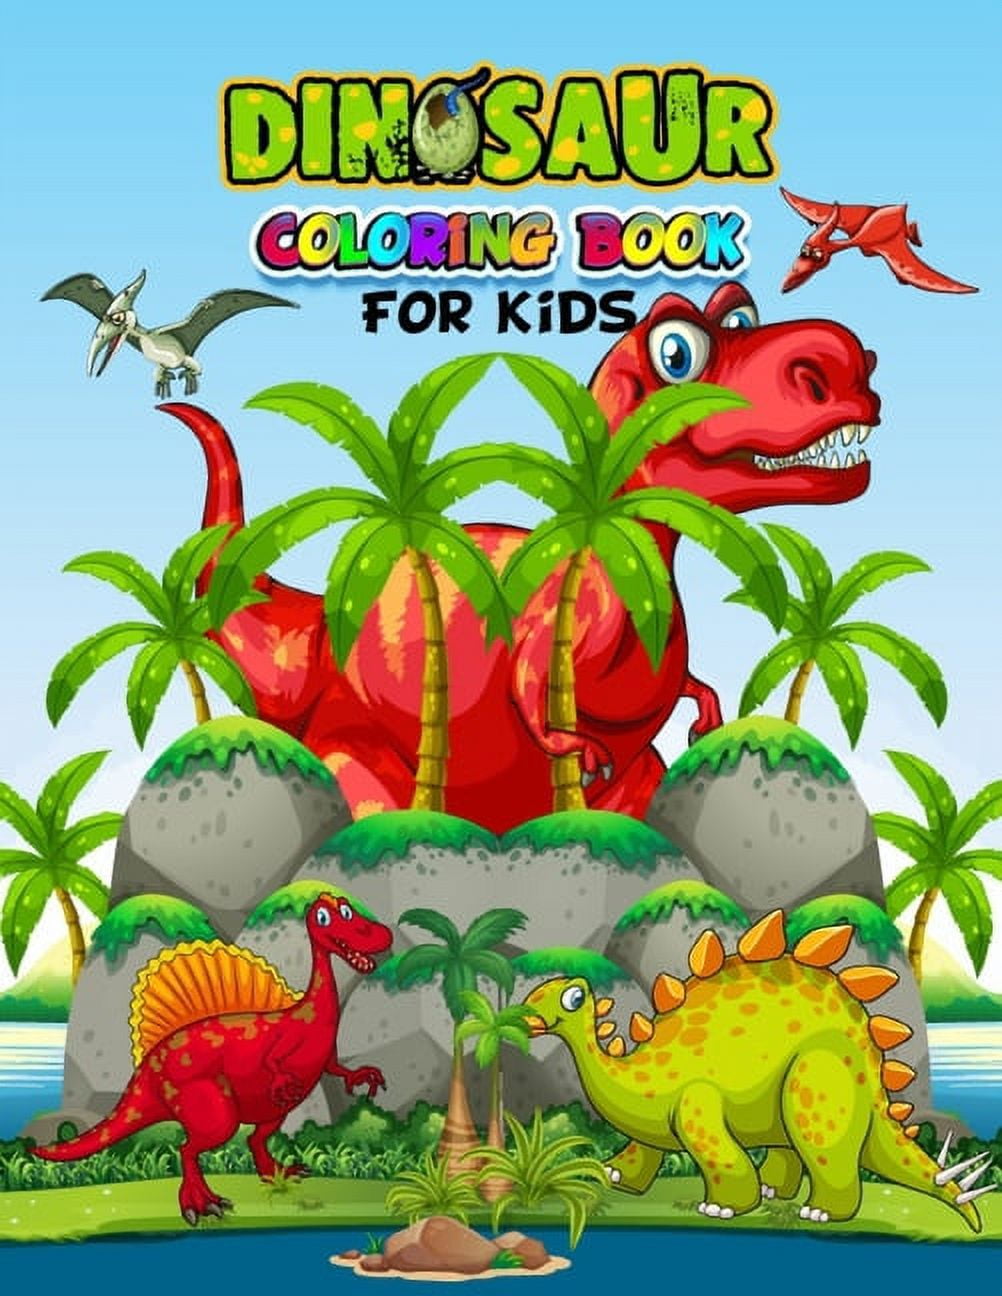 Dinosaur Coloring Books For Toddlers: A Toddlers Coloring Books ( Boys & Girls Or Any Preschoolers Ages 2-4, 4-8 who Like Dinosaurs) with 40 Cute Dinosaurs Illustrations / Perfect Gift from Parents Or Grandparents [Book]